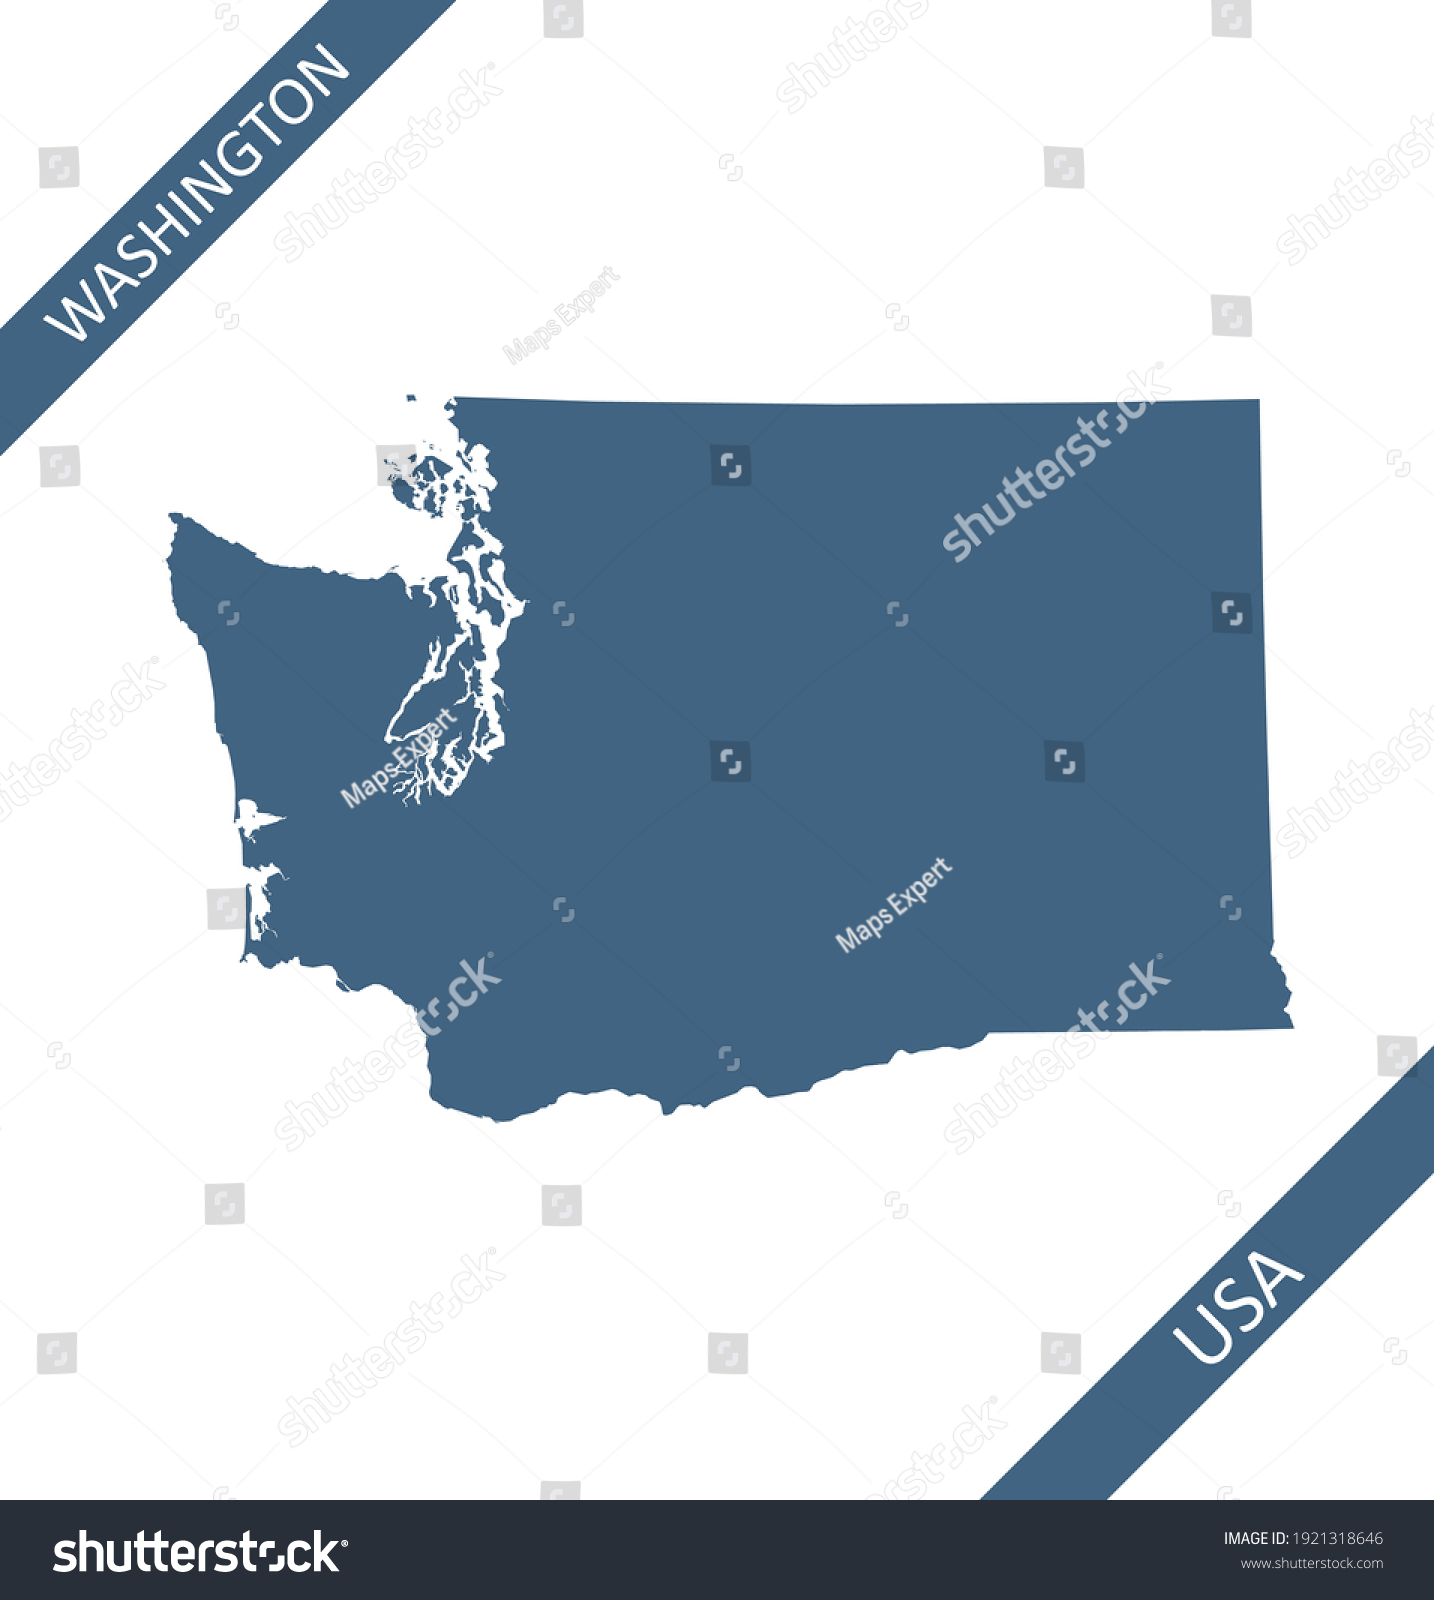 Washington Blank Map Outlines Vector Stock Vector Royalty Free Shutterstock